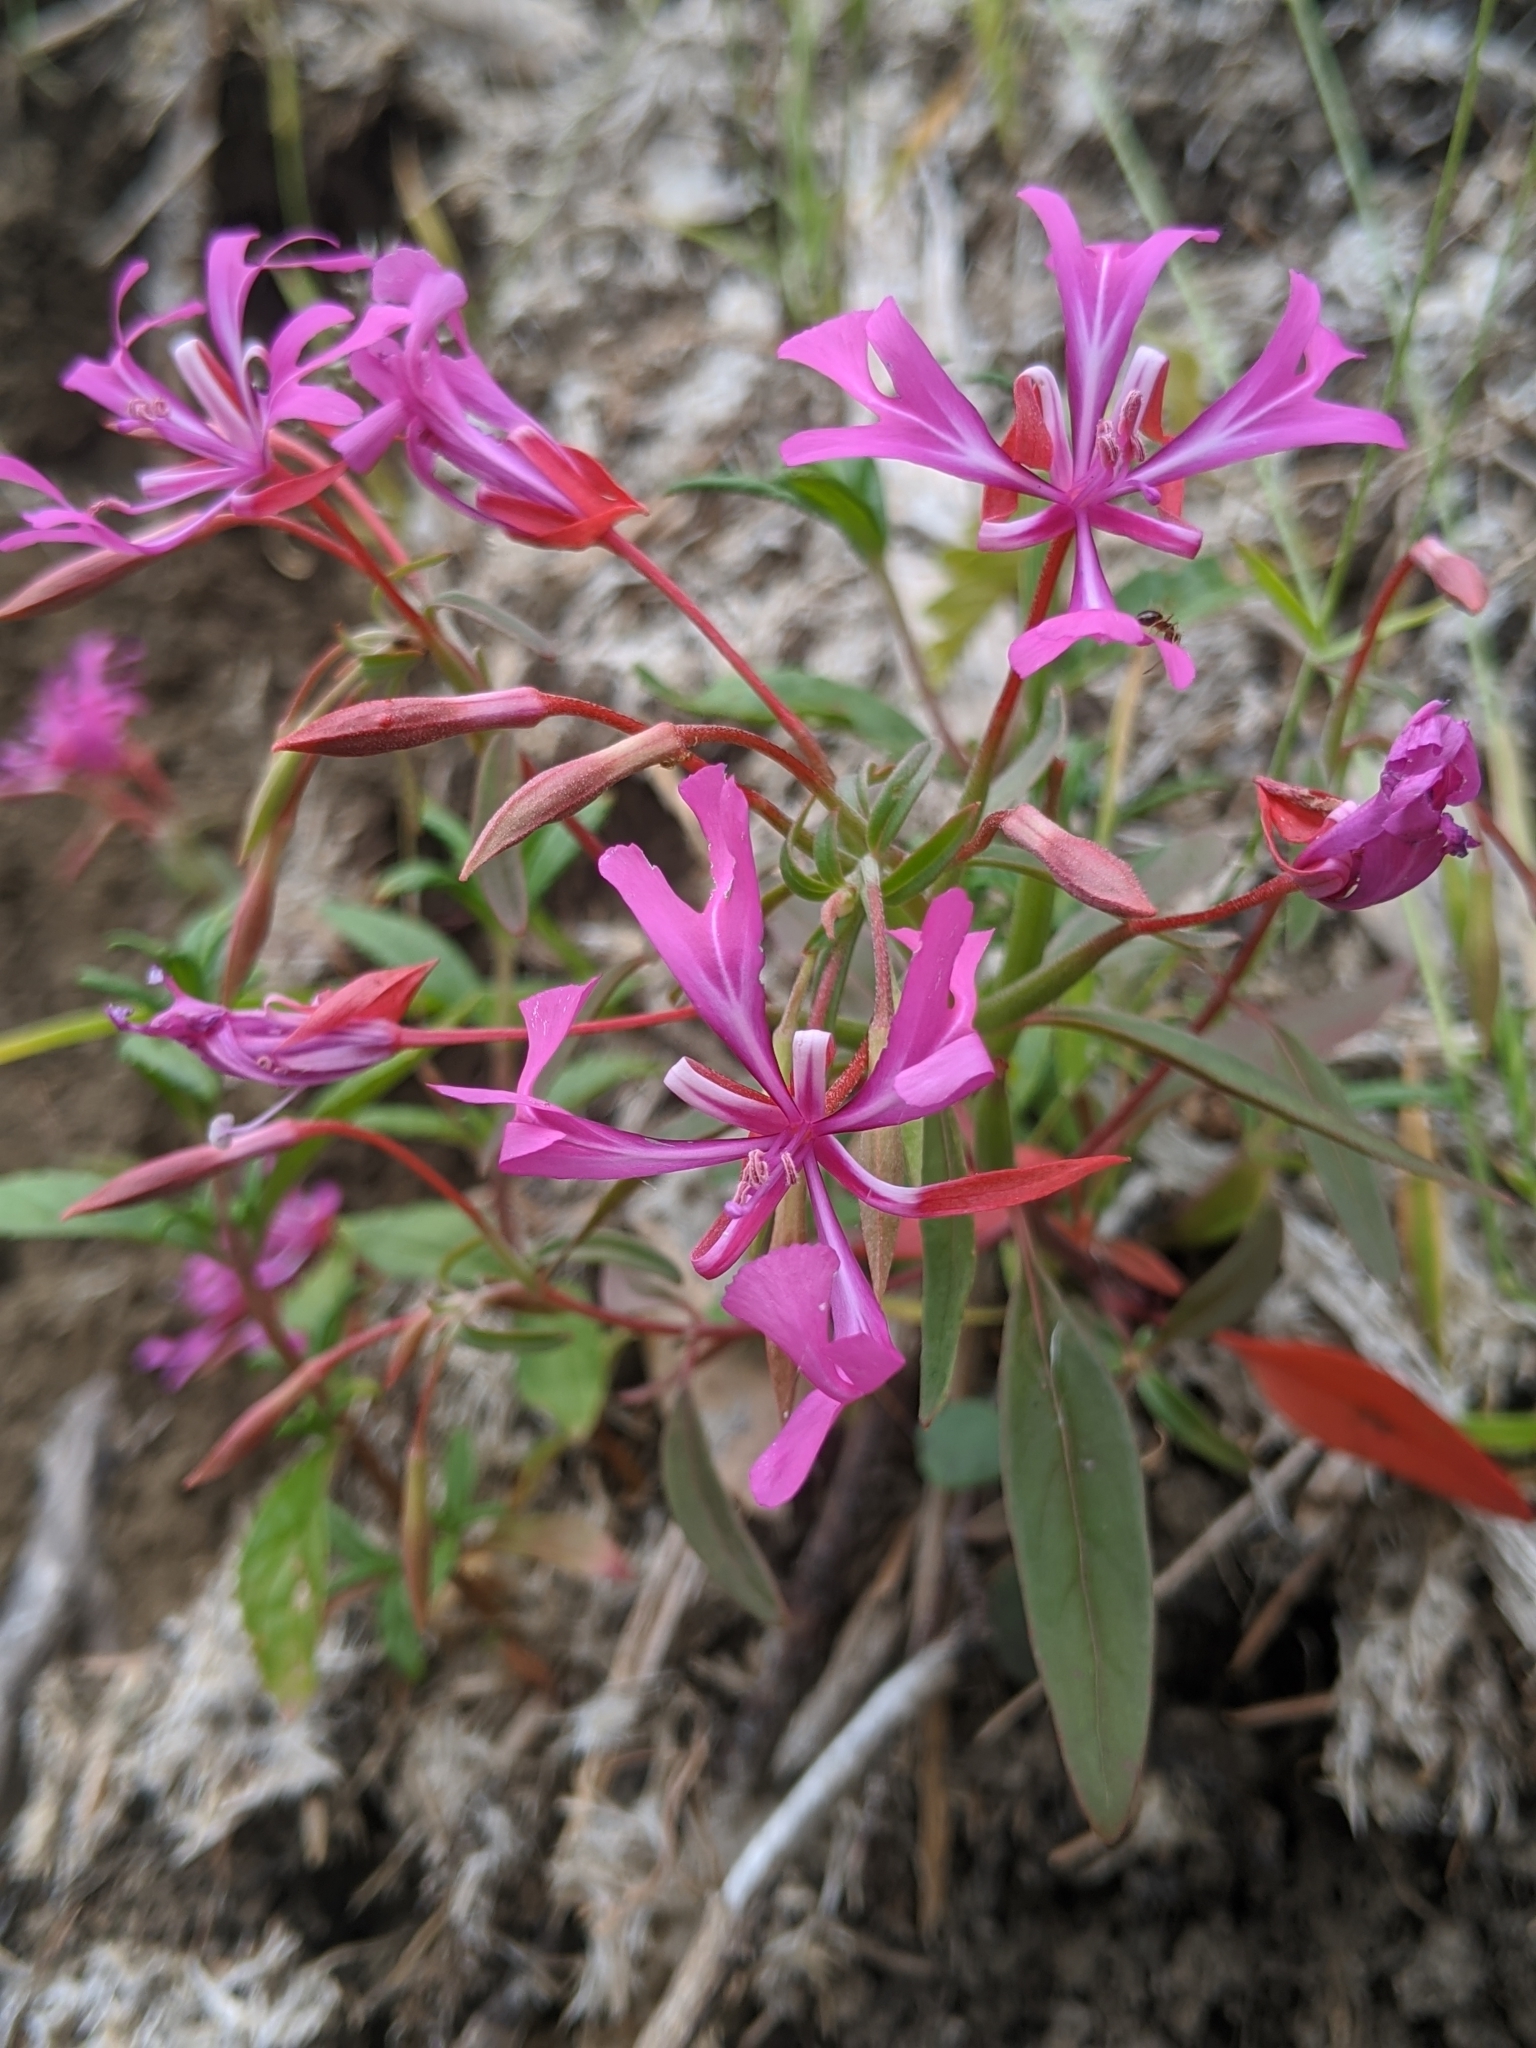 An image of Red Ribbons, Clarkia concinna, showing off the vibrant and showy magenta flowers.